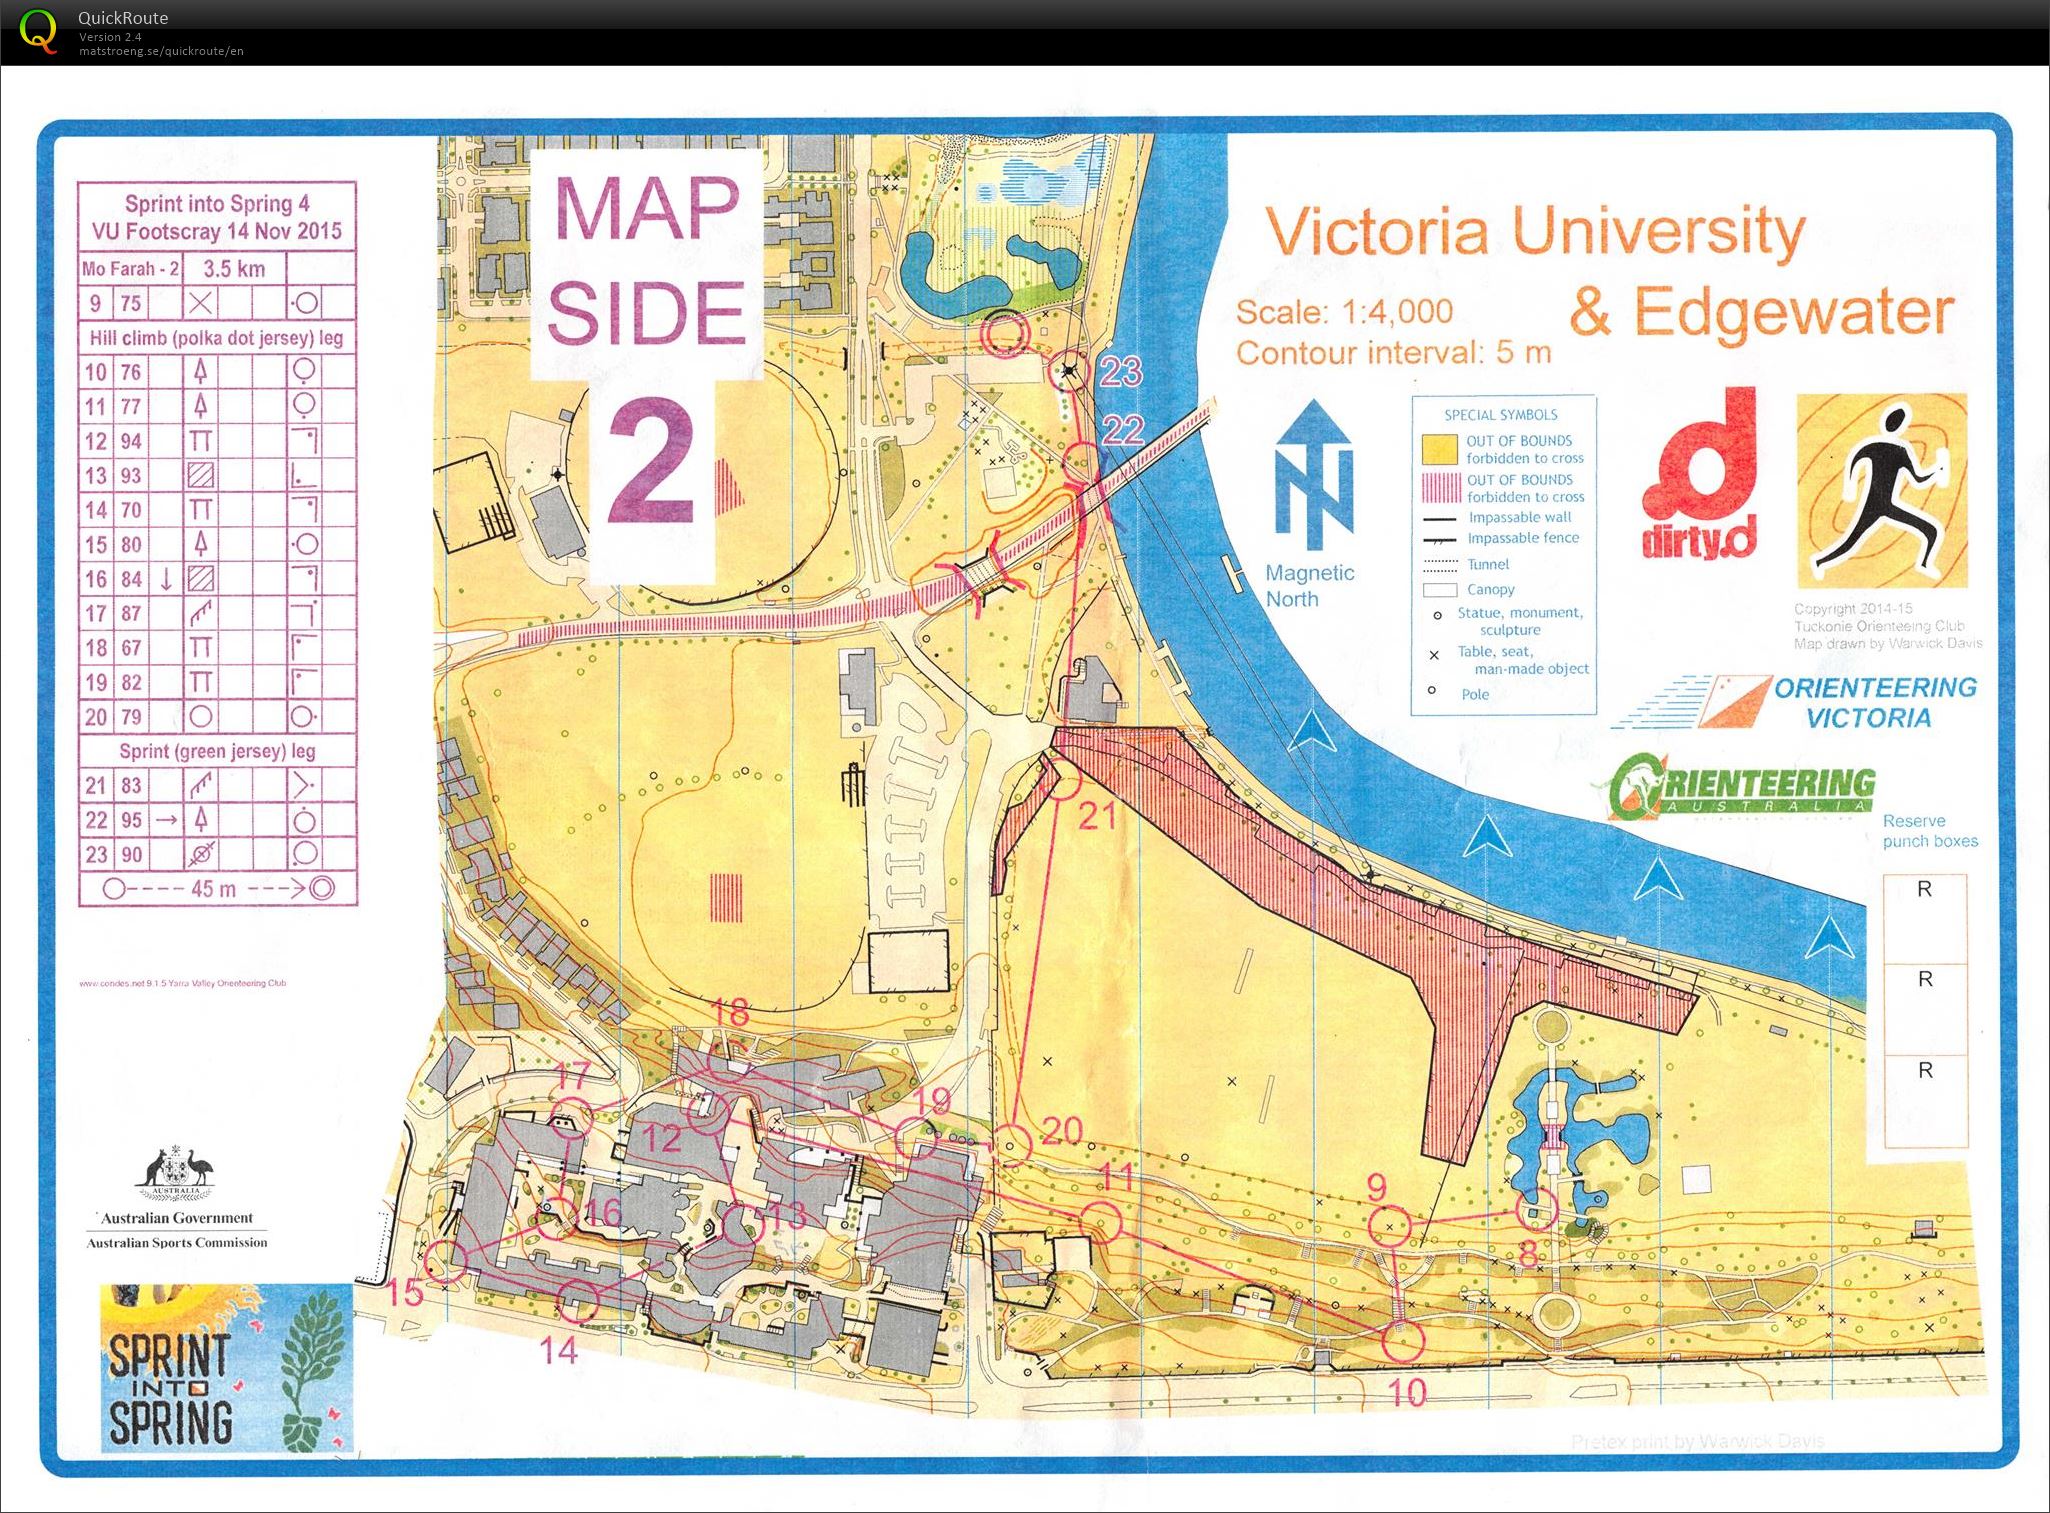 2015 Sprint into Spring Race 4 map 2 (14-11-2015)